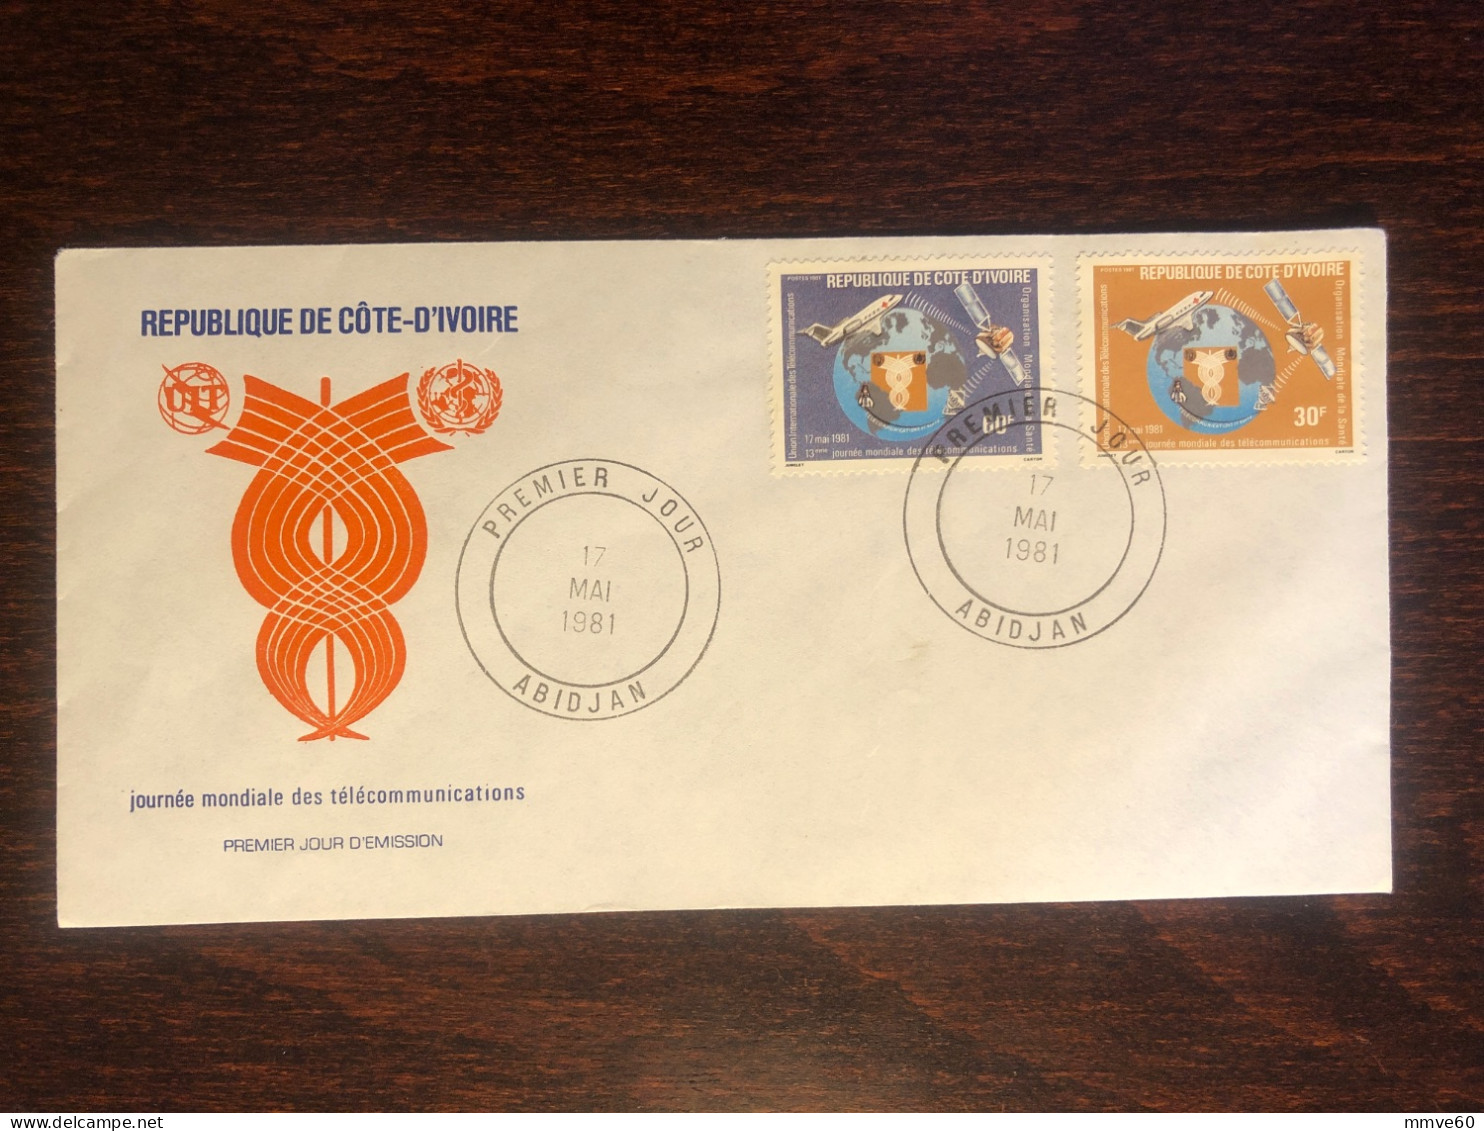 IVORY COAST COTE D’IVOIRE FDC COVER 1981 YEAR  TELECOMMUNICATIONS AND HEALTH MEDICINE STAMPS - Côte D'Ivoire (1960-...)